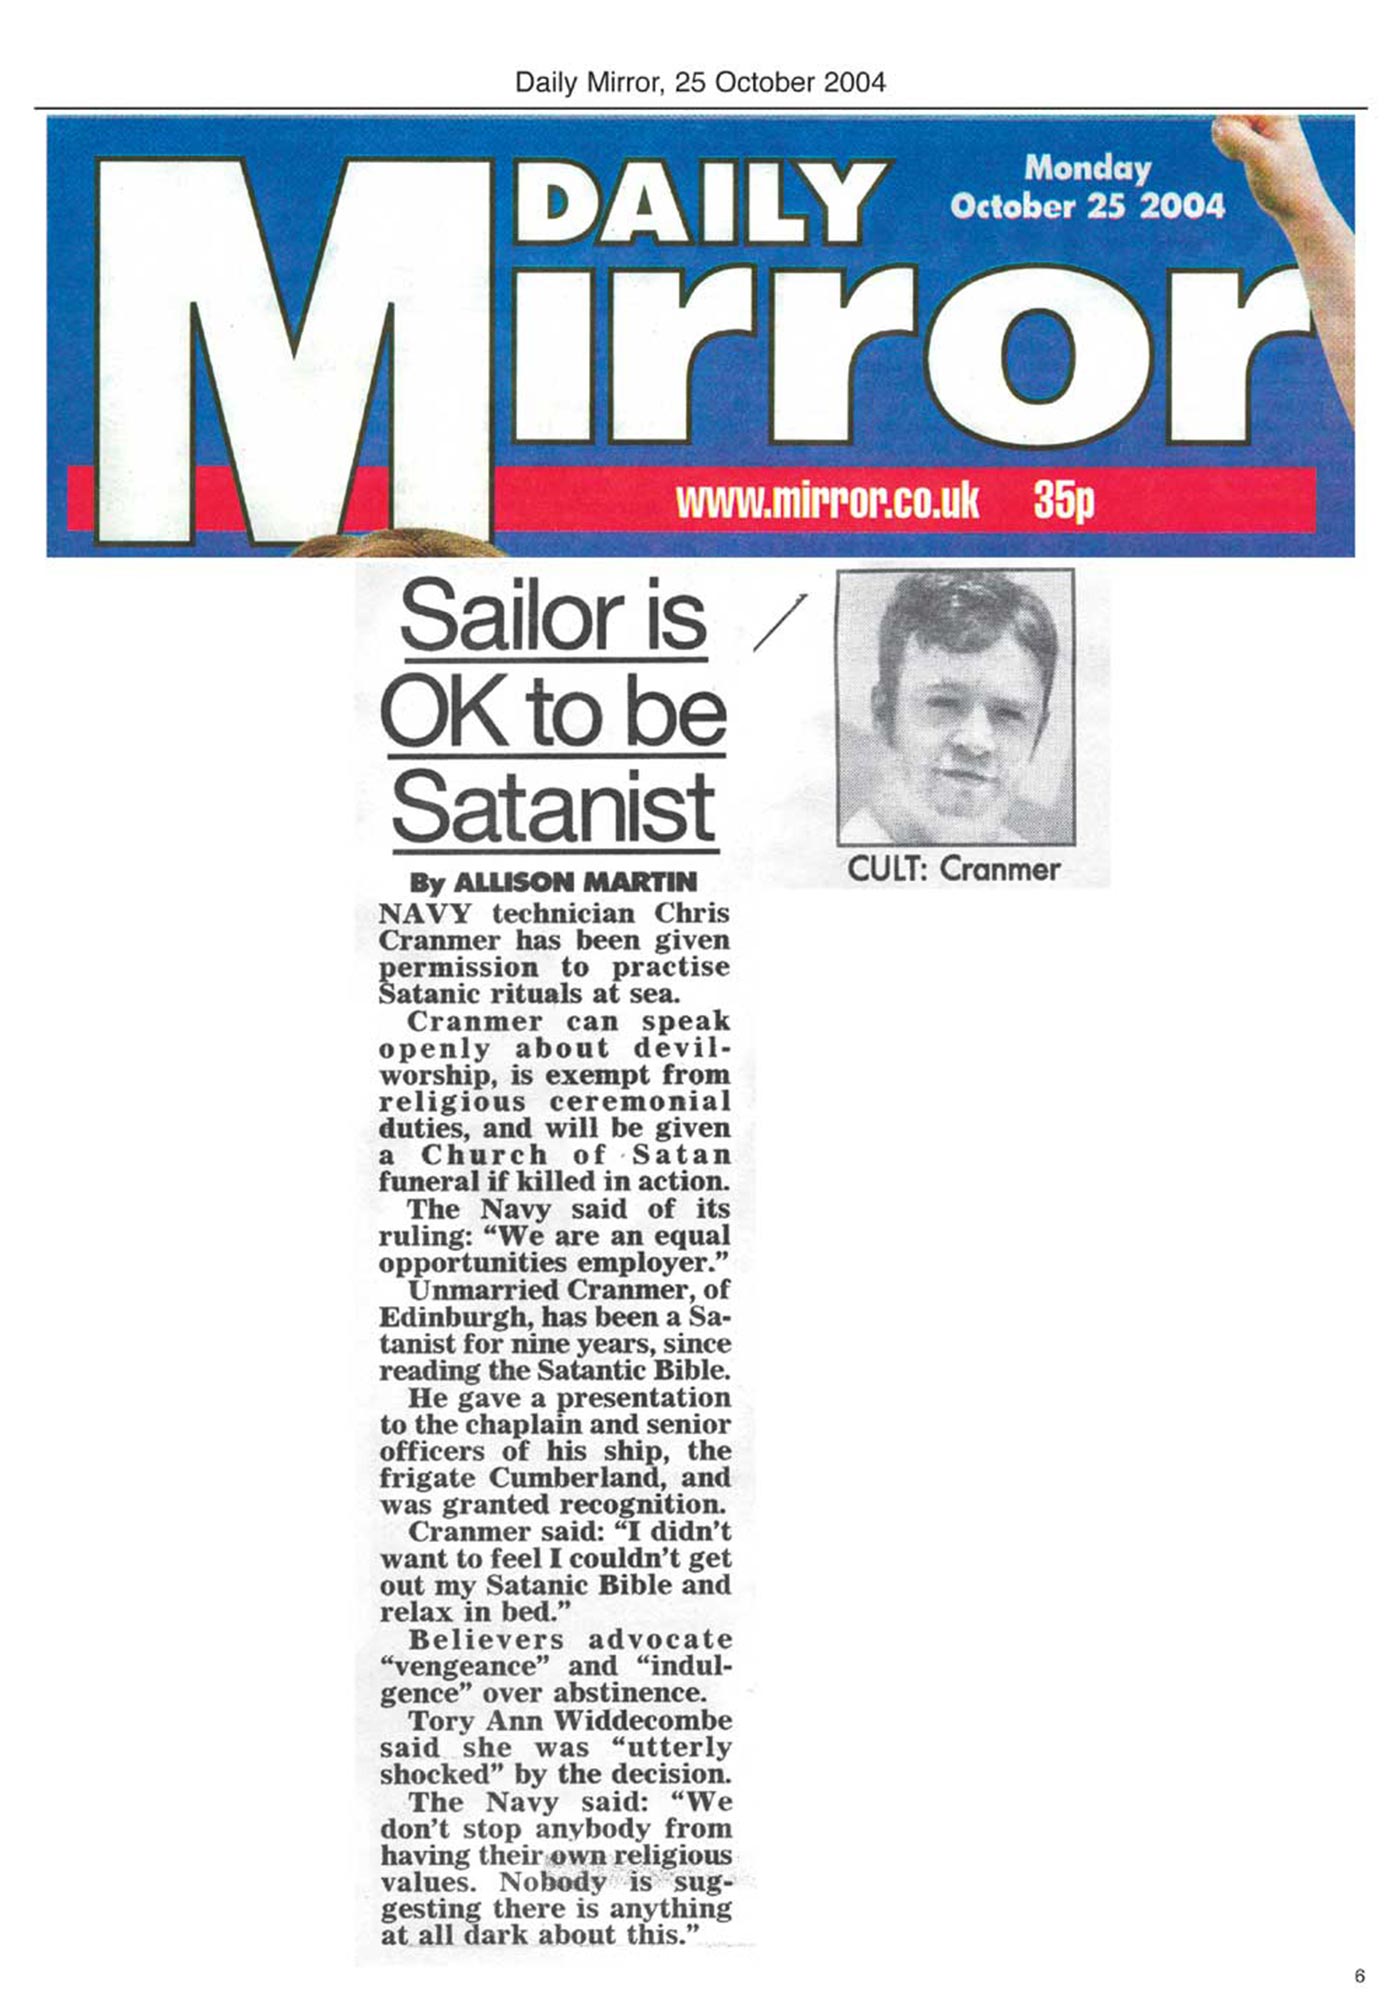 The Daily Mirror October 2004